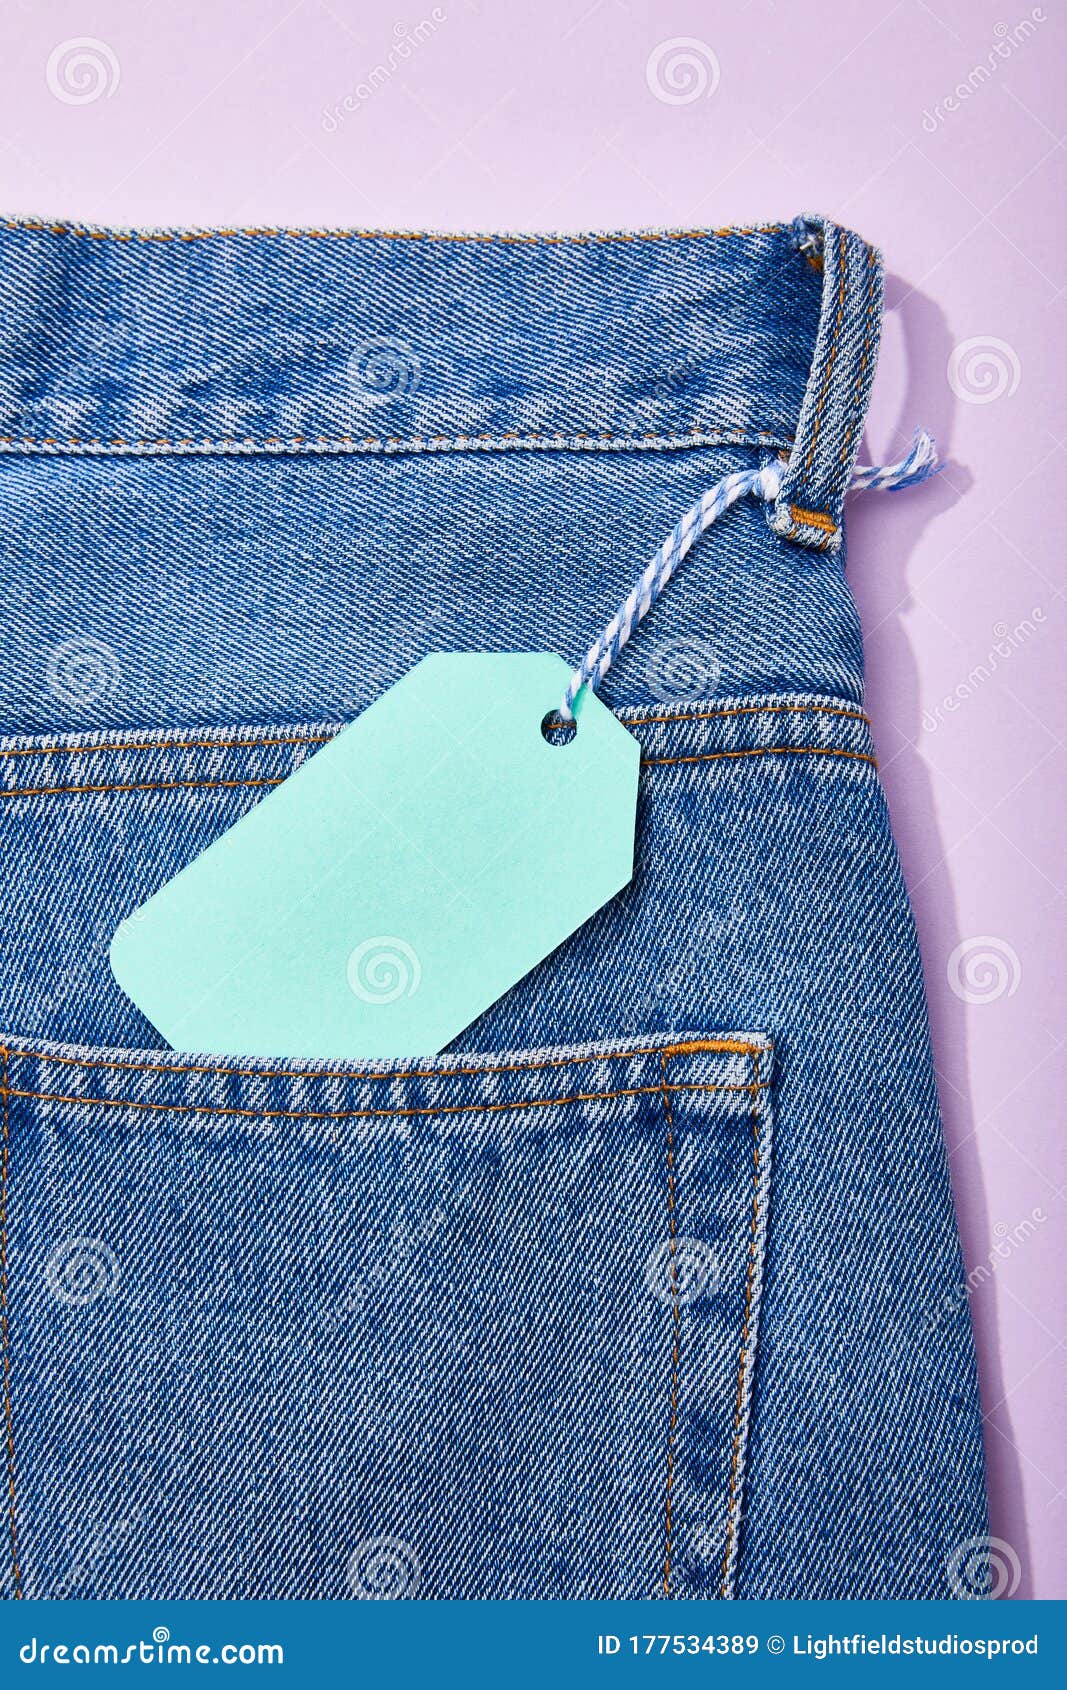 View of Turquoise Sale Tag on Stock Image - Image of shopping, color ...